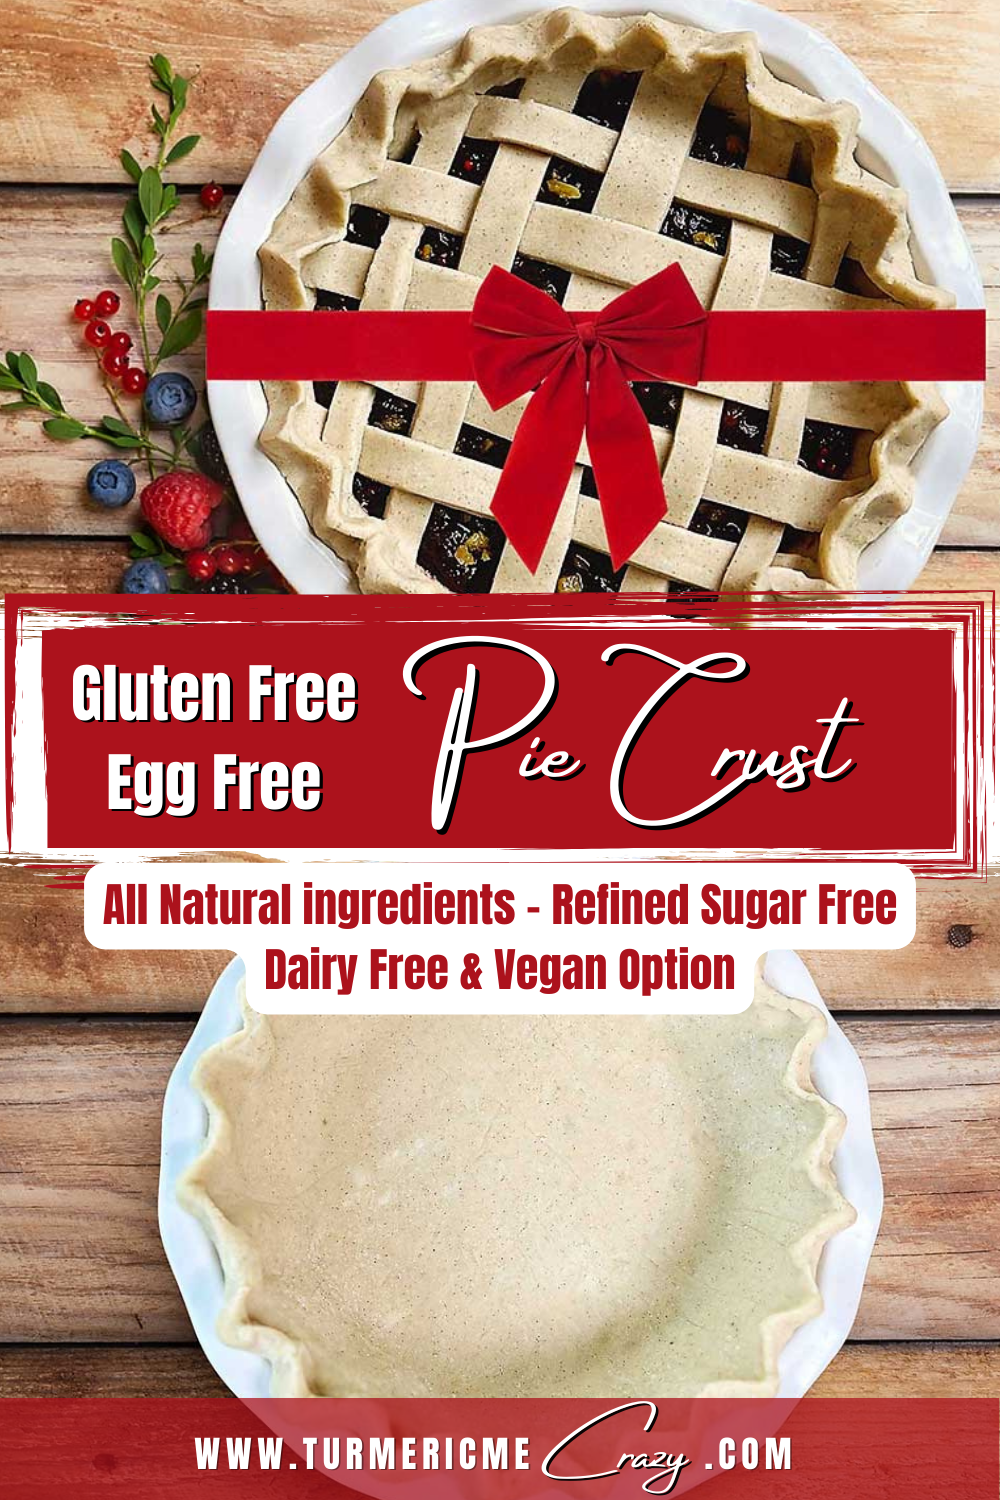 Indulge in the perfect pie experience with our gluten-free, egg-free pie crust recipe. Impossibly flaky, delightfully flavourful, and free from gluten, eggs or xanthan gum! With just 7 natural and simple ingredients, this easy pie crust is a dream. Discover the secret to a crust that's both wholesome and irresistible. Plus, I'll also show you my fool proof rolling & transferring technique, how to form a fluted pie rim and how to make a lattice pie crust top! #glutenfreeeggfreepiecrust #easypiecrust #easyglutenfreepiecrust #thanksgivingpie #Christmaspie